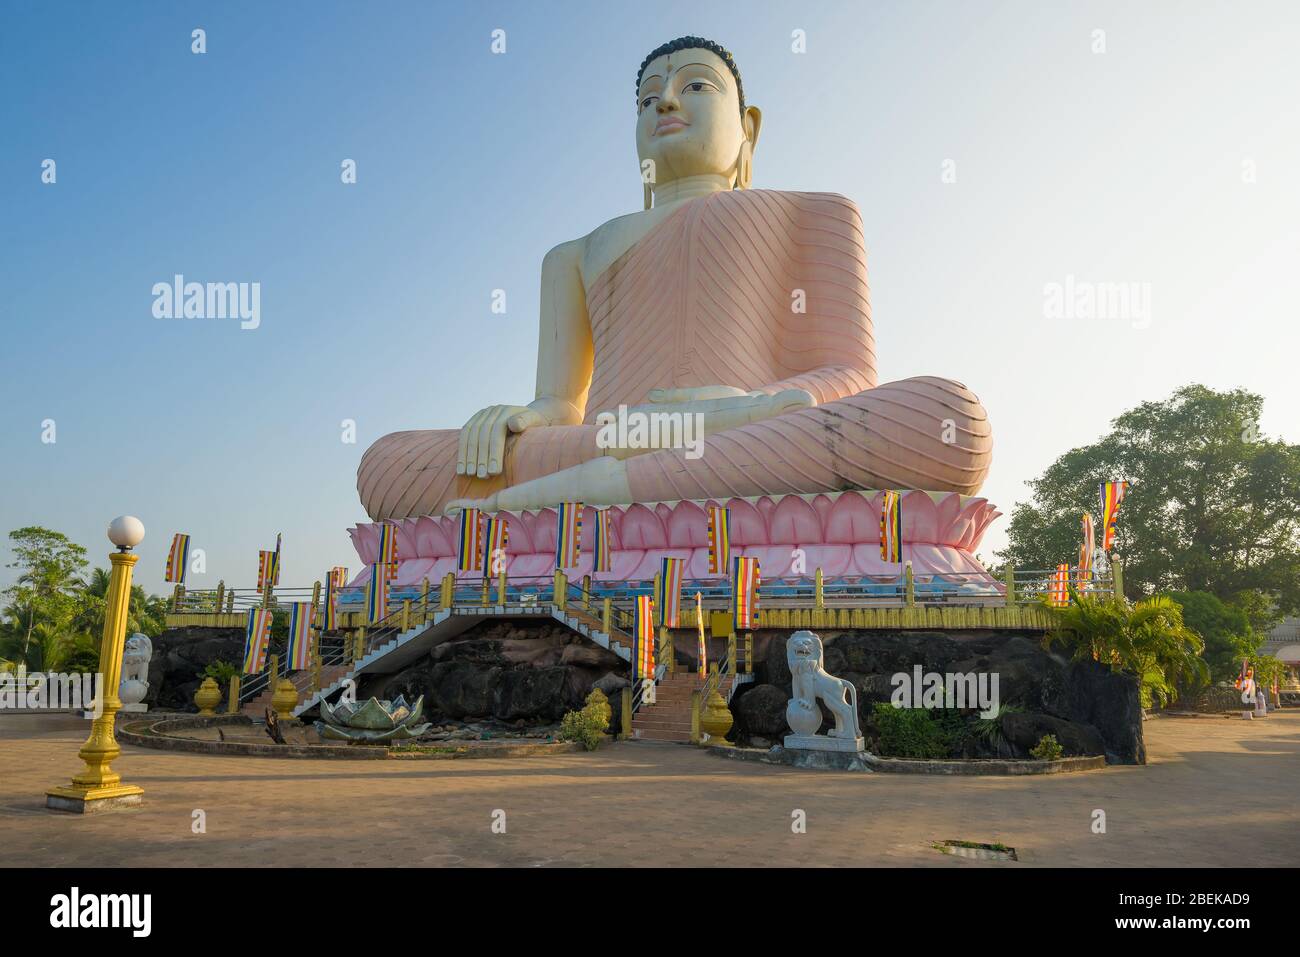 ALUTHGAMA, SRI LANKA - FEBRUARY 16, 2020: View of a giant sculpture of a seated Buddha in the Buddhist temple of Kande Viharaya Temple Stock Photo